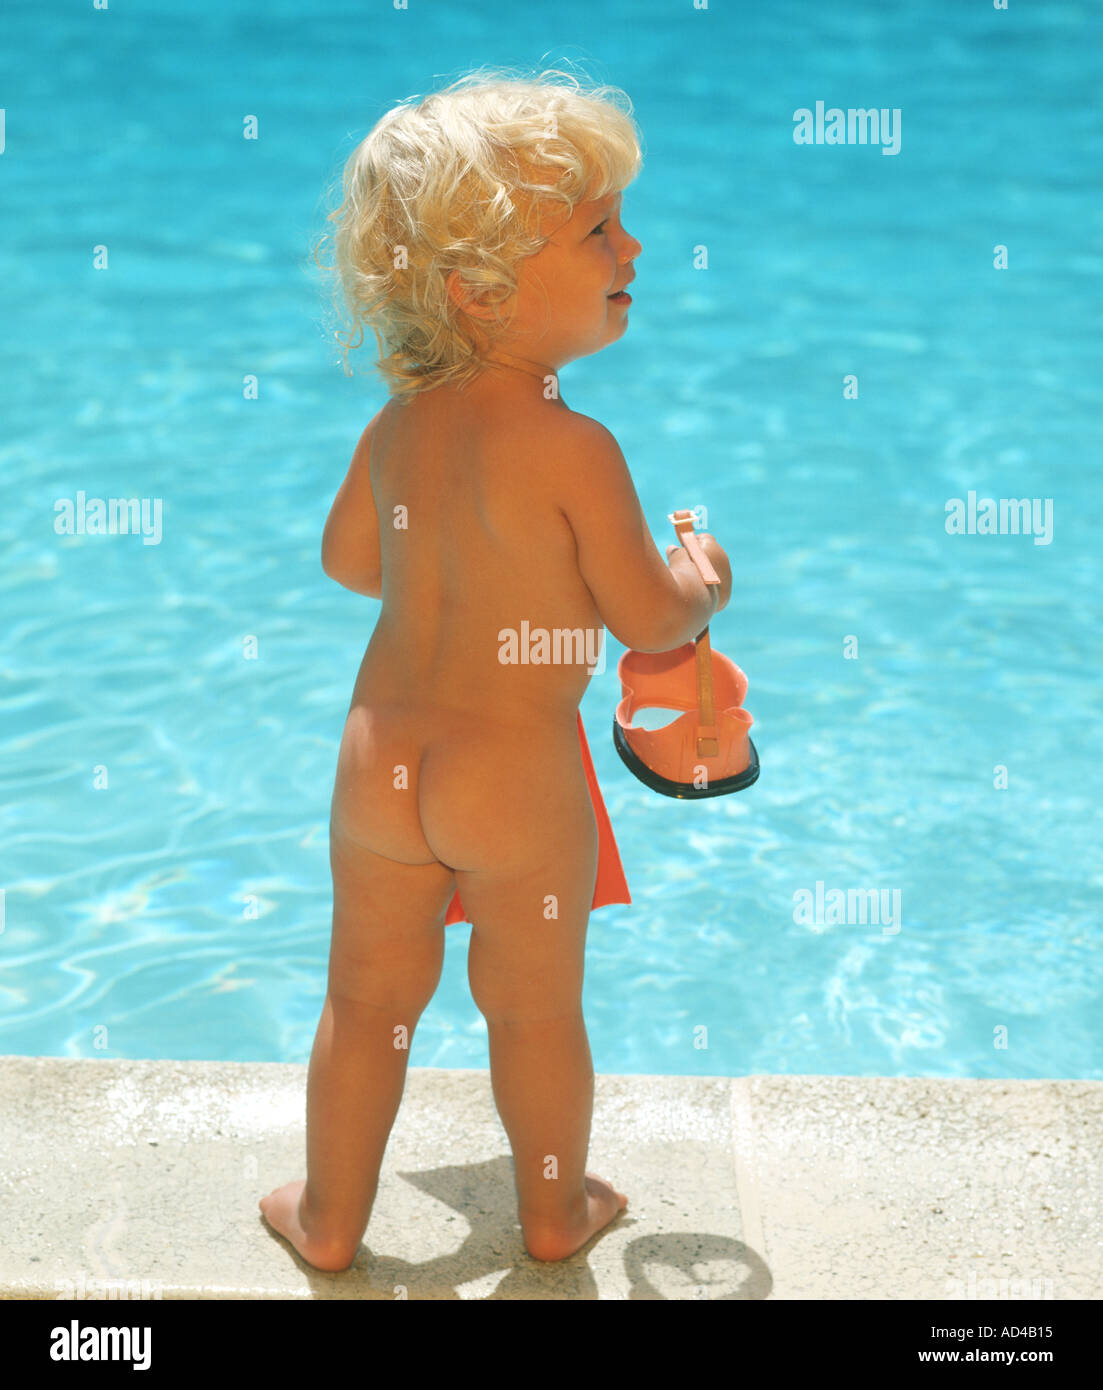 baby girl by swimming pool in birthday suit Stock Photo